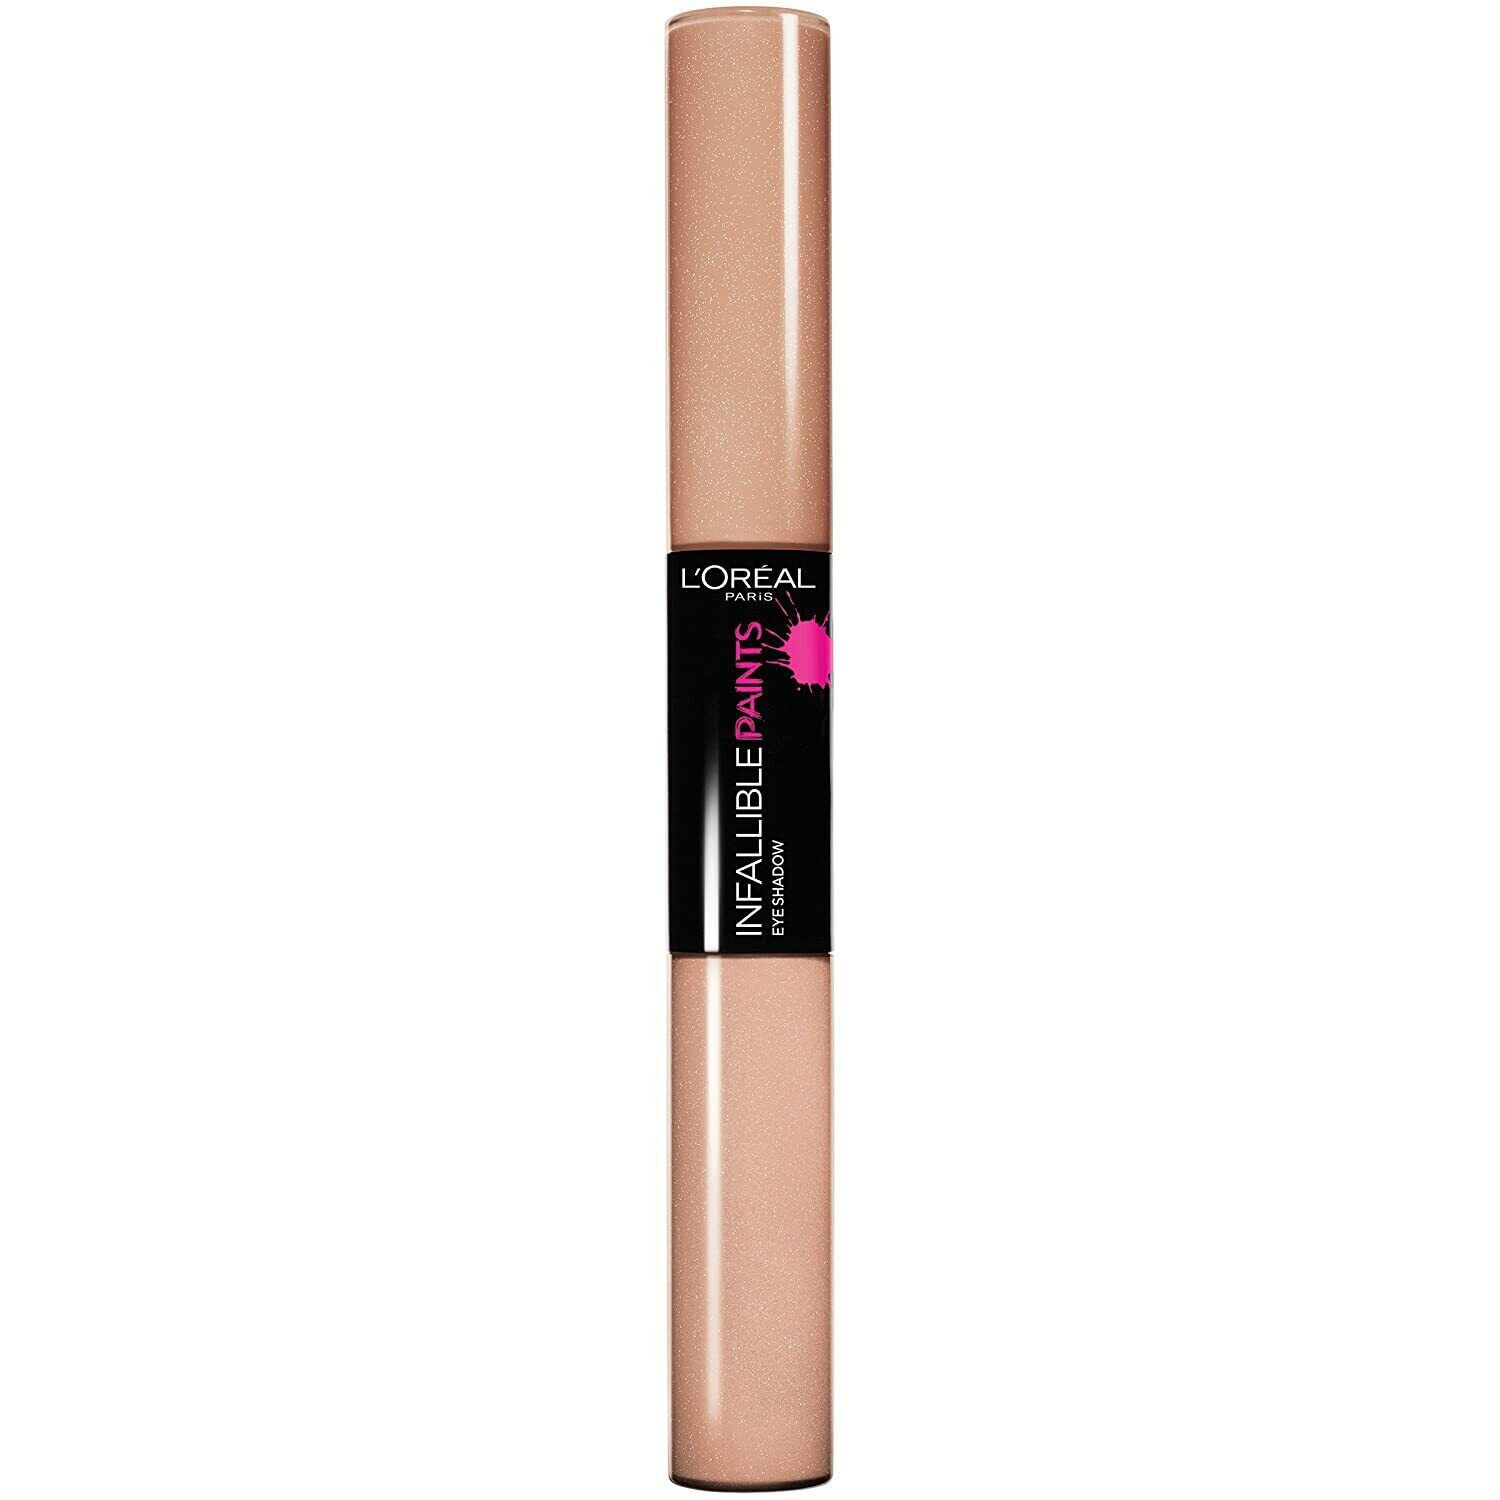 L'Oreal INFALLIBLE PAINTS EYE SHADOW DUO, # 318 NUDE FISHNET - $5.93